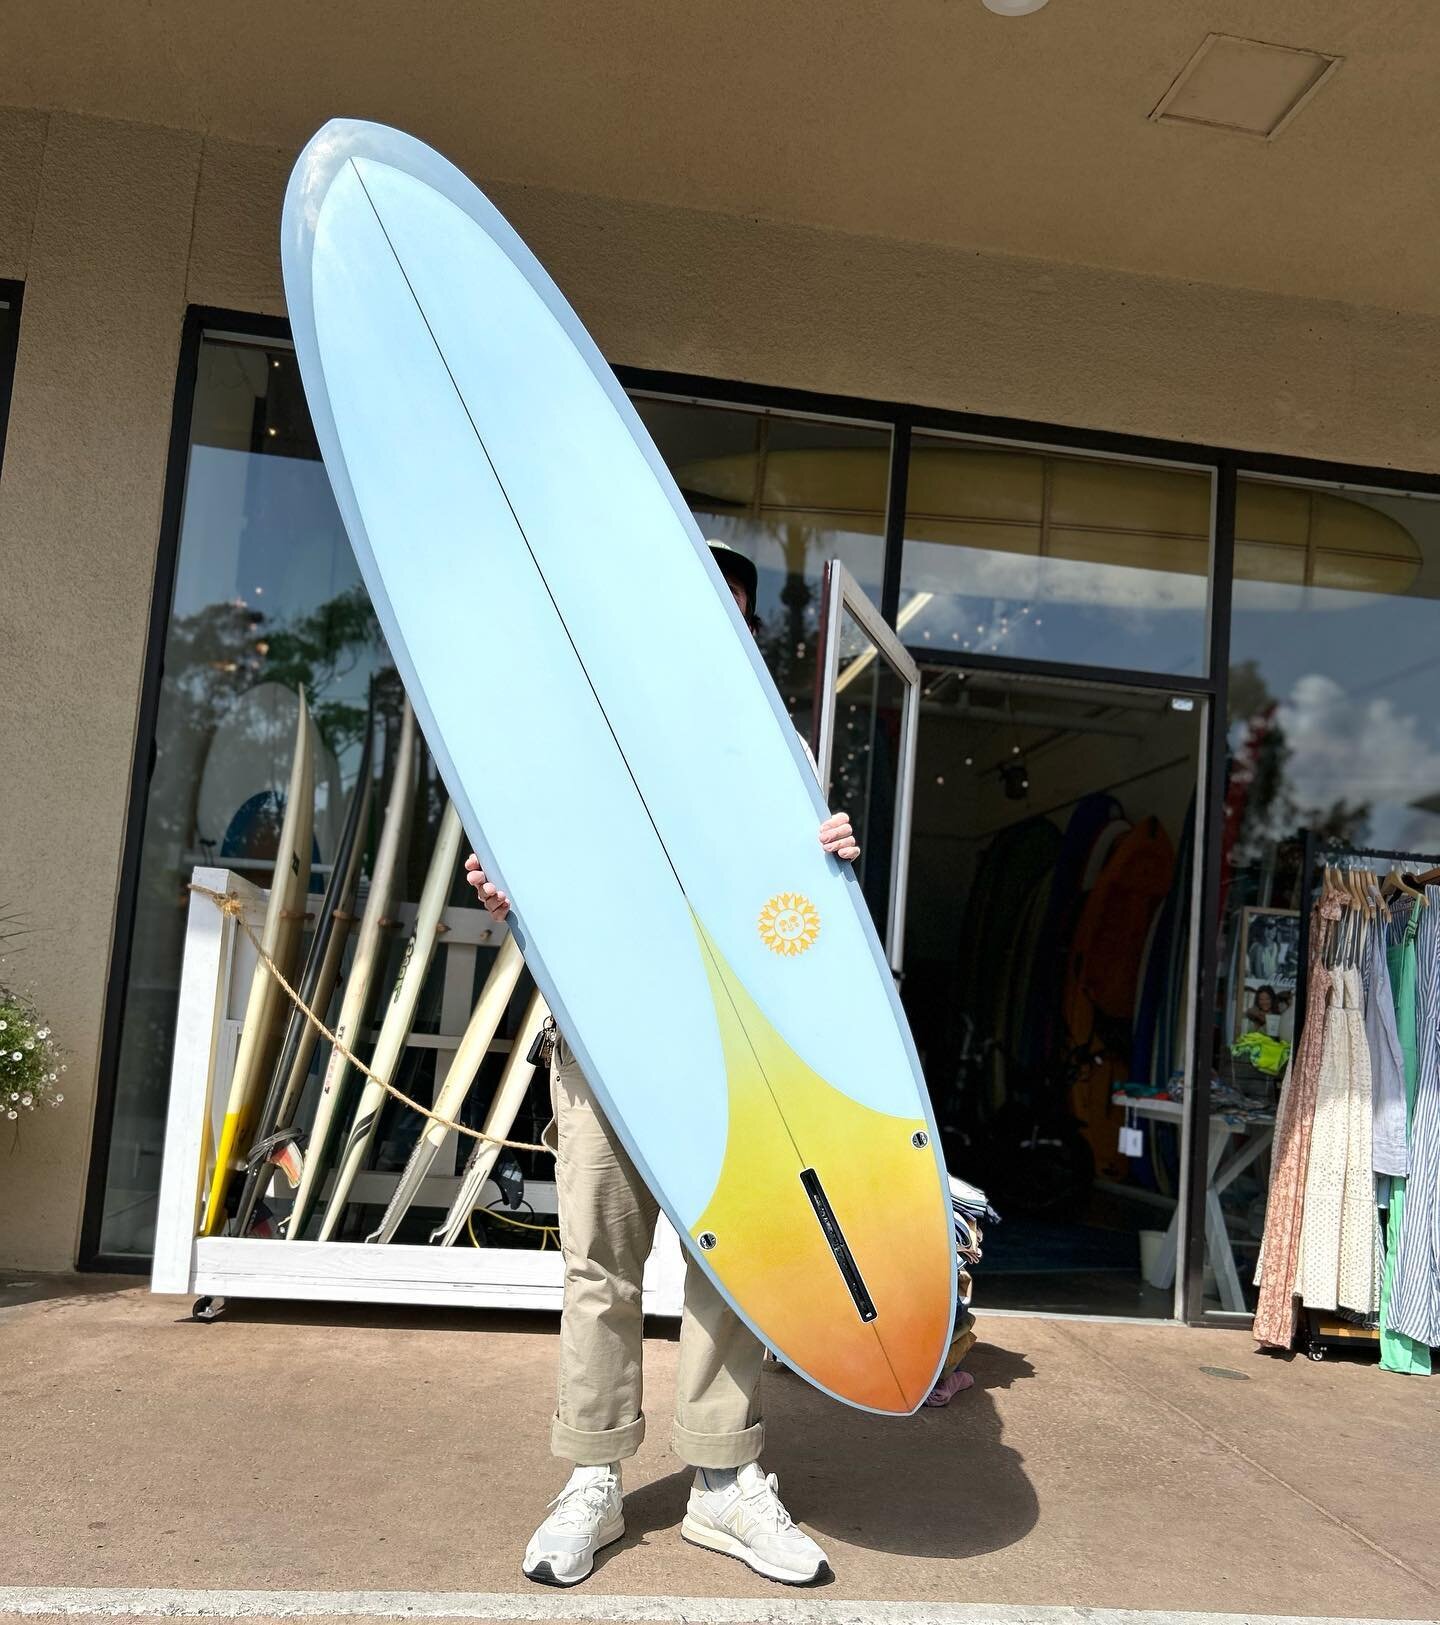 Mistress Drop in Malibu at @seansoulsurf // Both have custom tail patch gradient color work by myself // Sanded Gloss // Full Resin Colorwork // 2x6oz Deck / 6oz Bottom:: 
Blue :: 7&rsquo;6 w/ FCS tabs
Green: 7&rsquo;10 
.
.
Glassing by #oceanworksgl